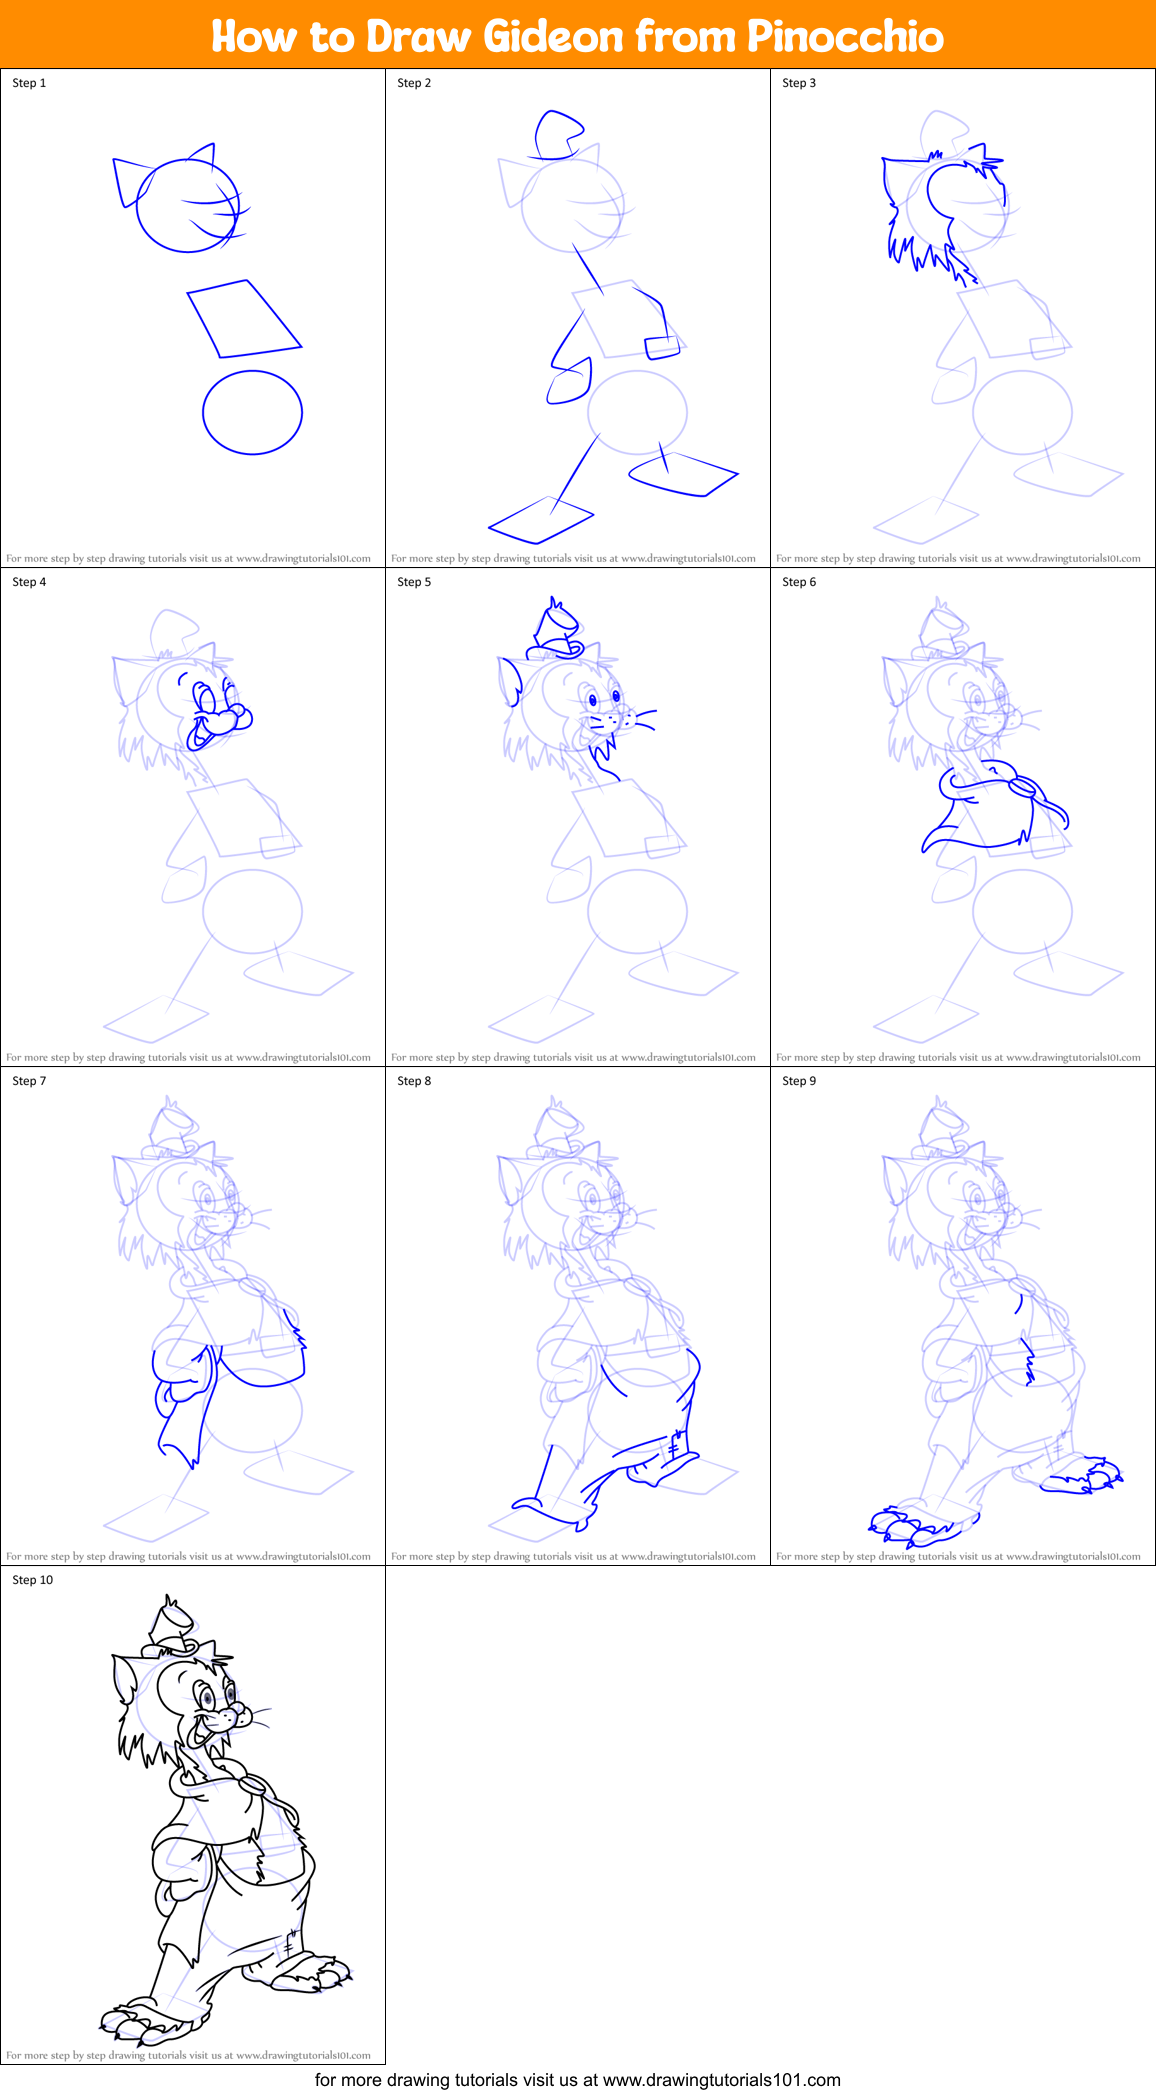 How to Draw Gideon from Pinocchio printable step by step drawing sheet ...